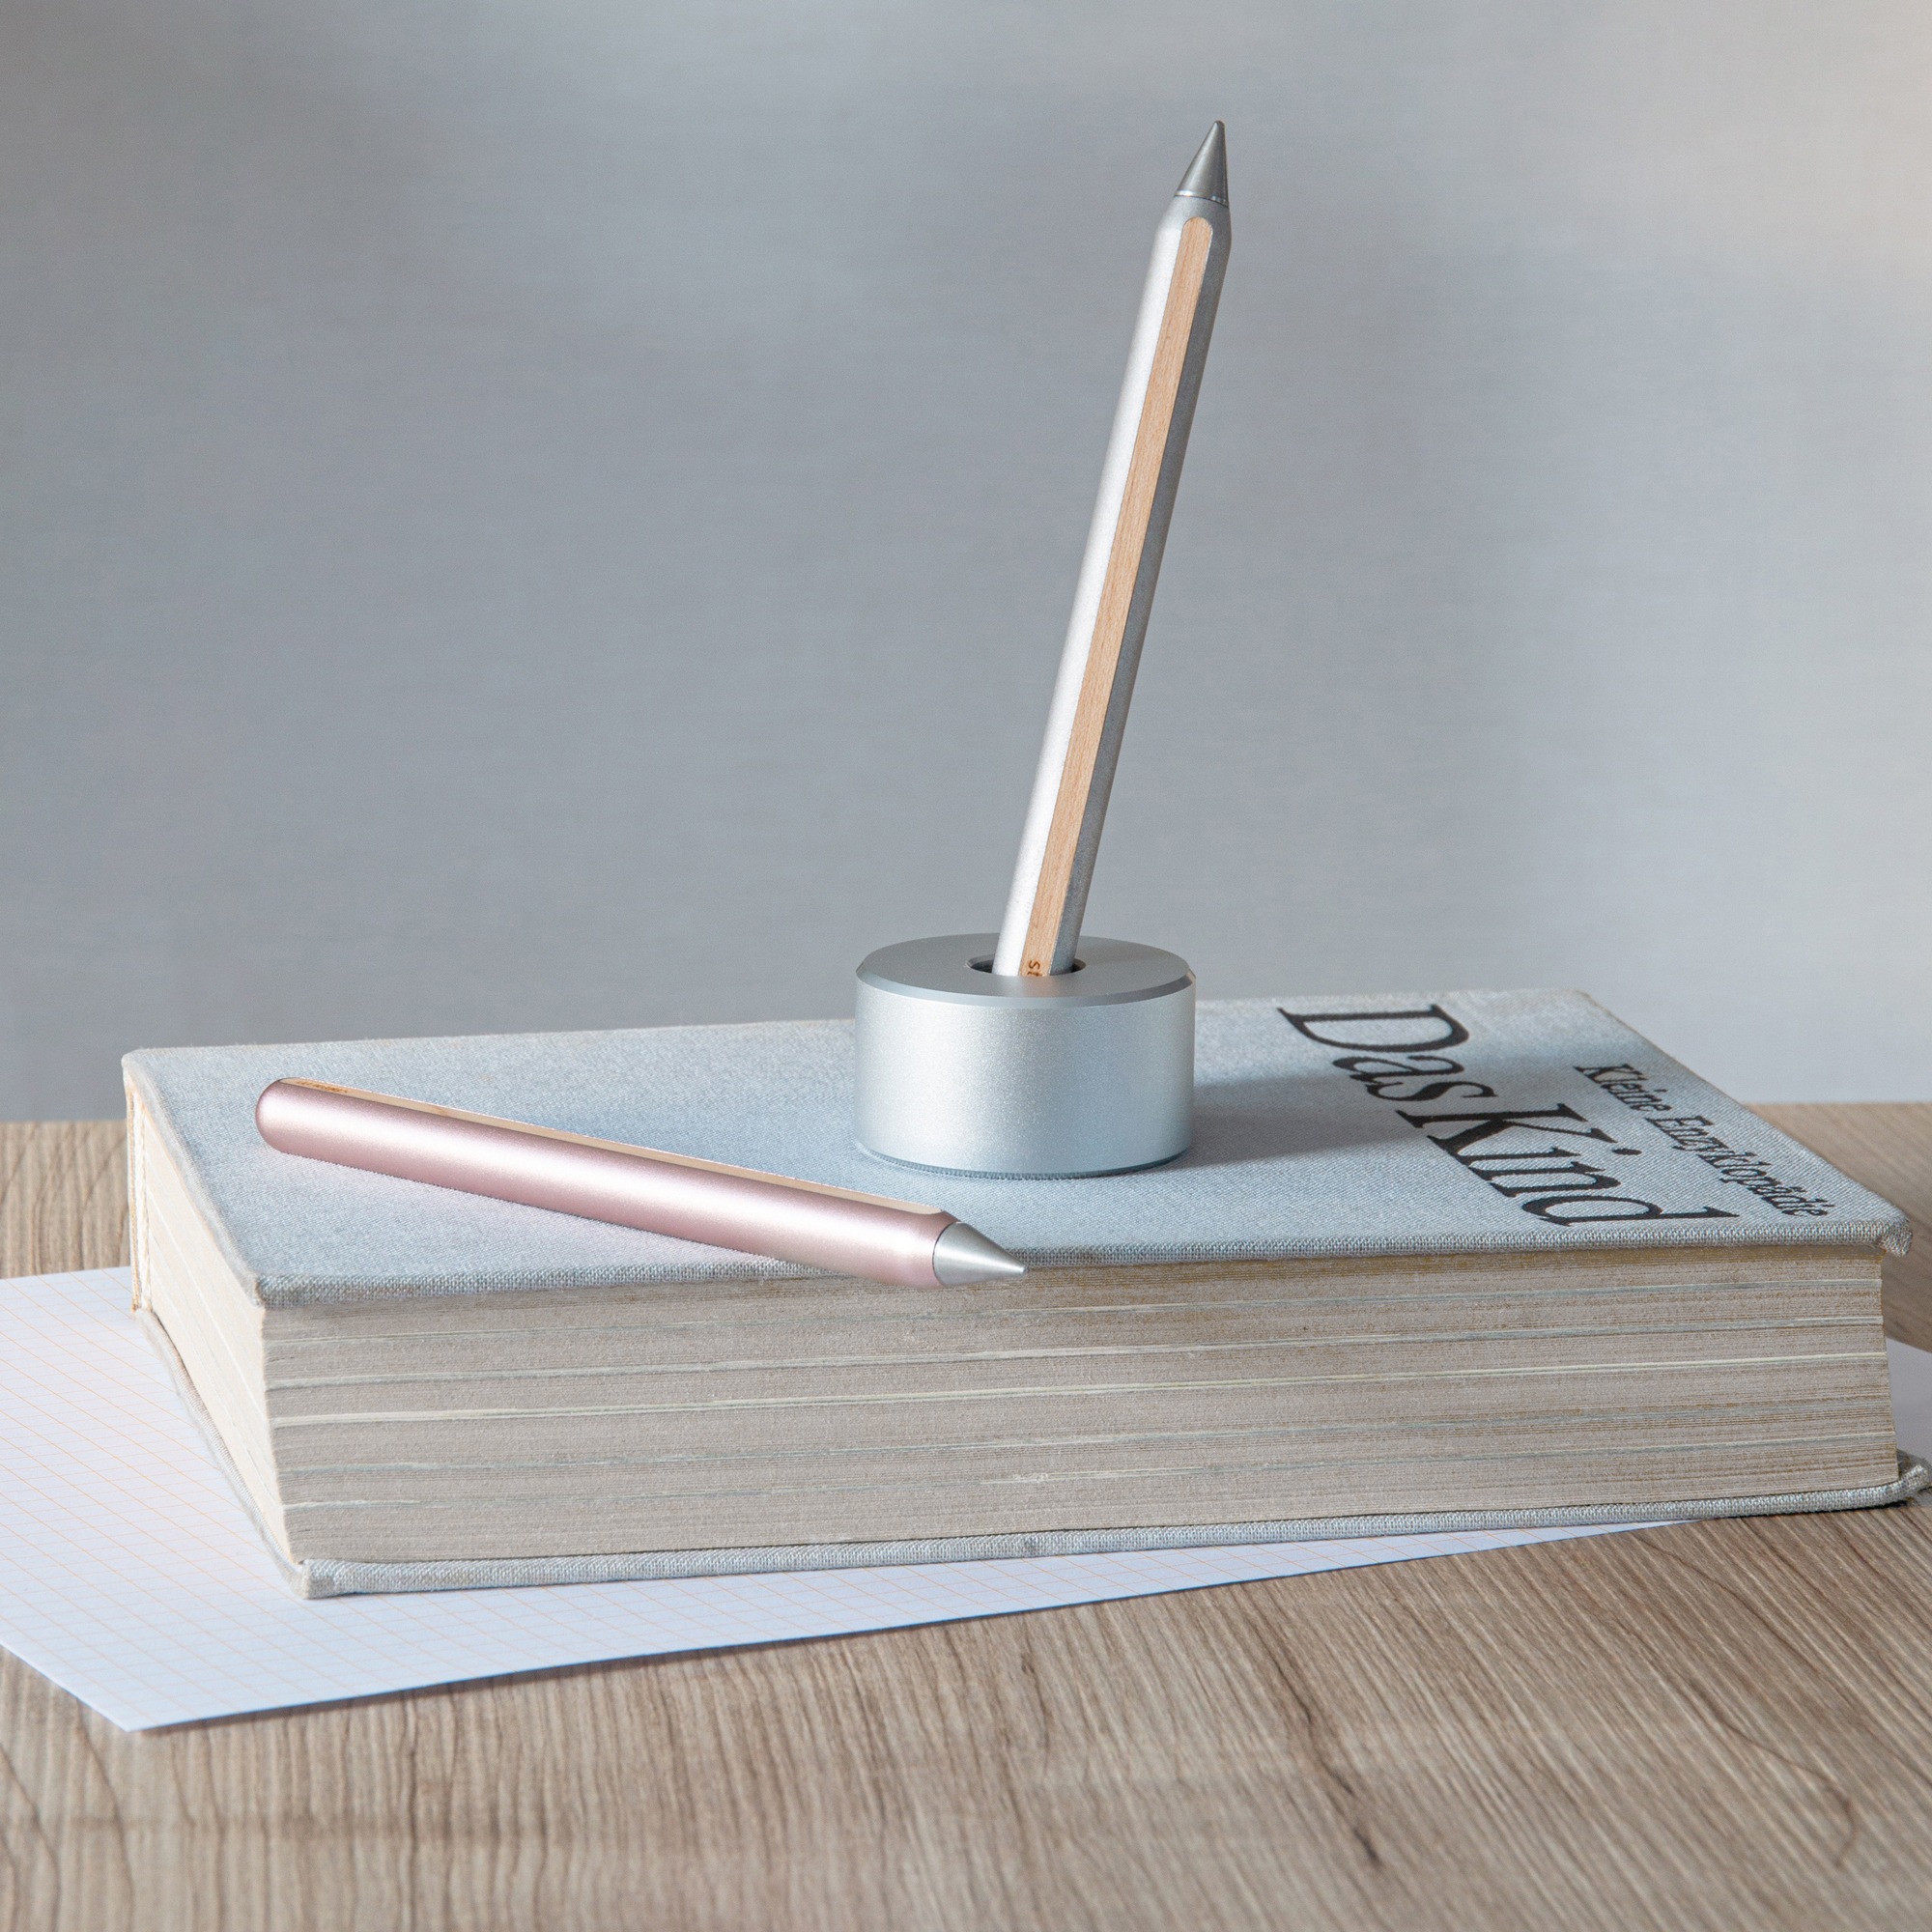 Magic Pencil That Never Needs Sharpening